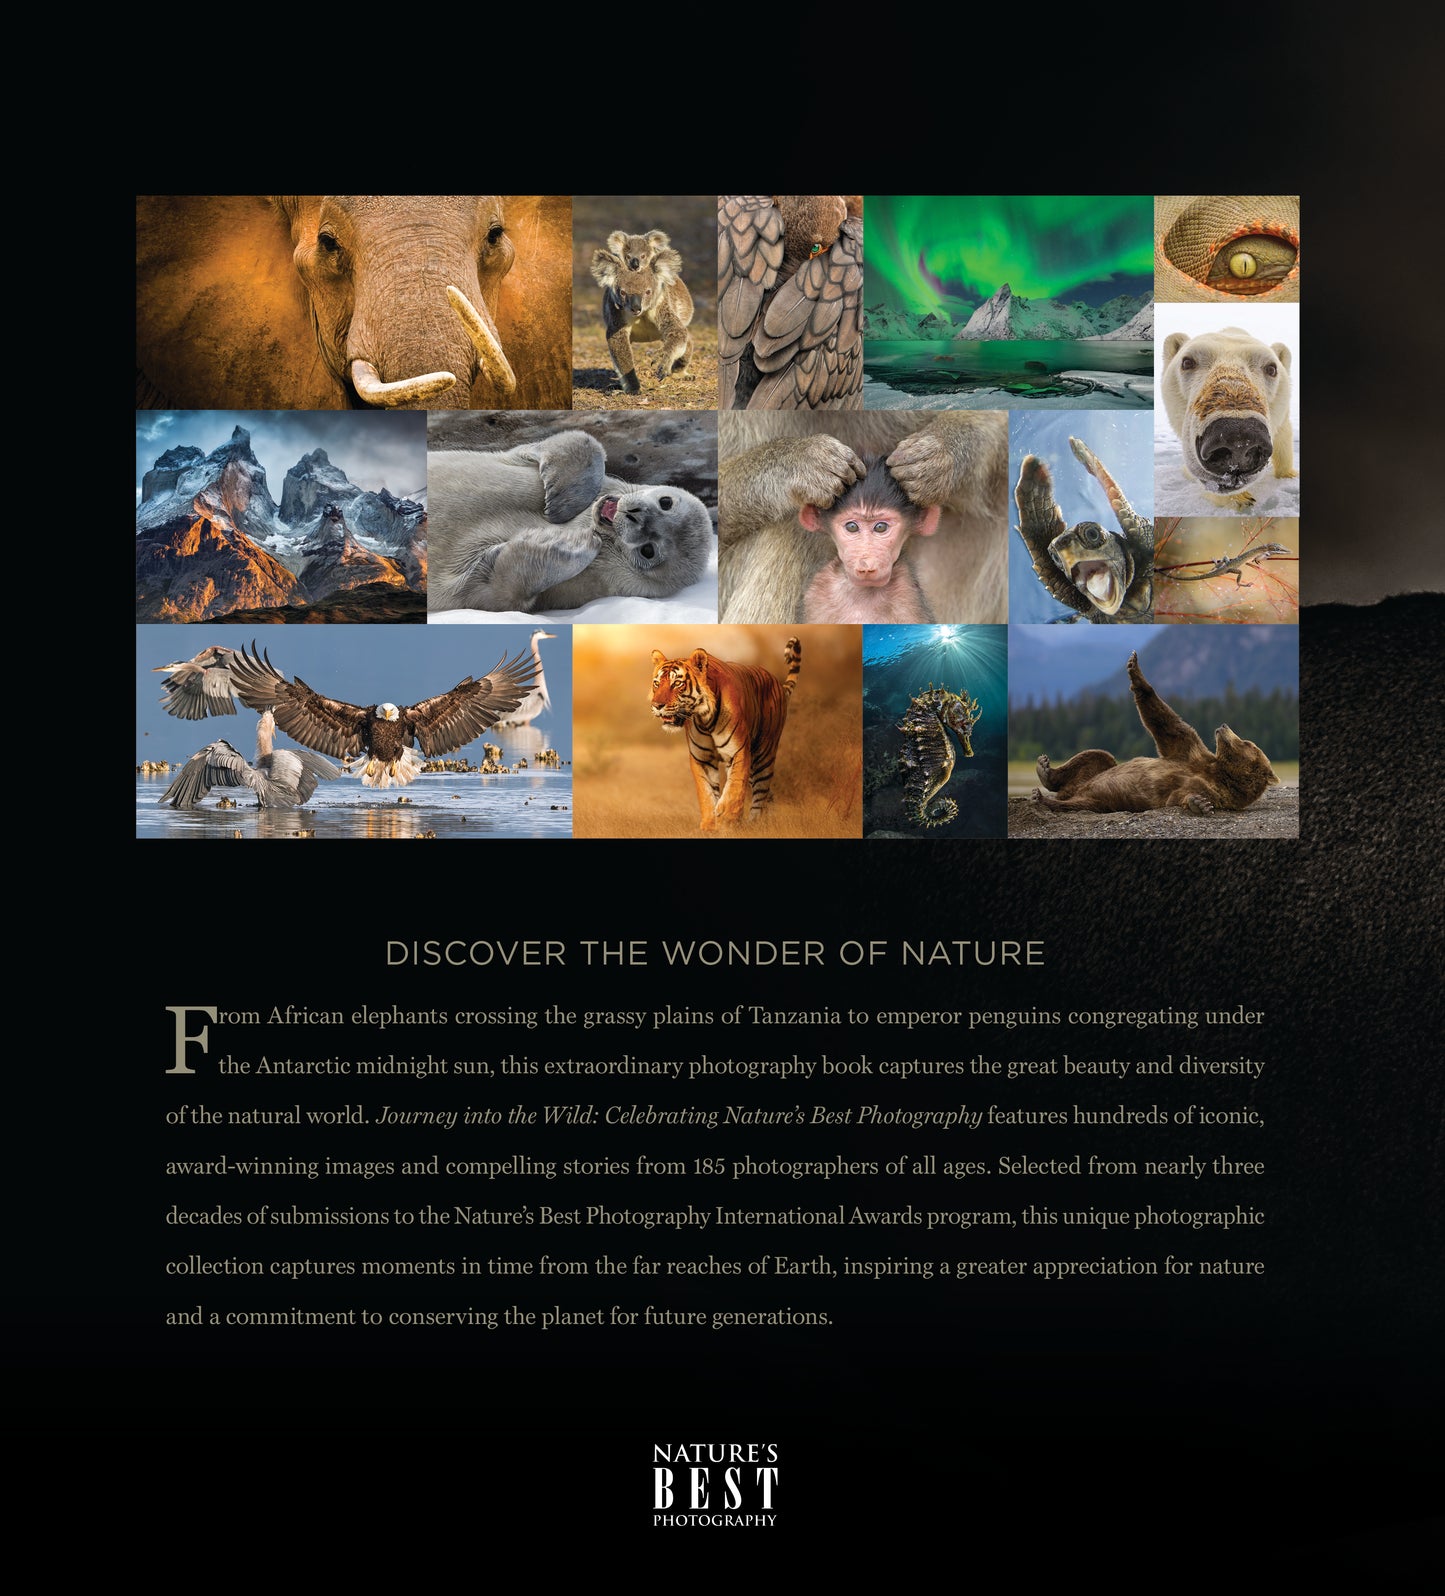 Journey into the Wild: Celebrating Nature's Best Photography